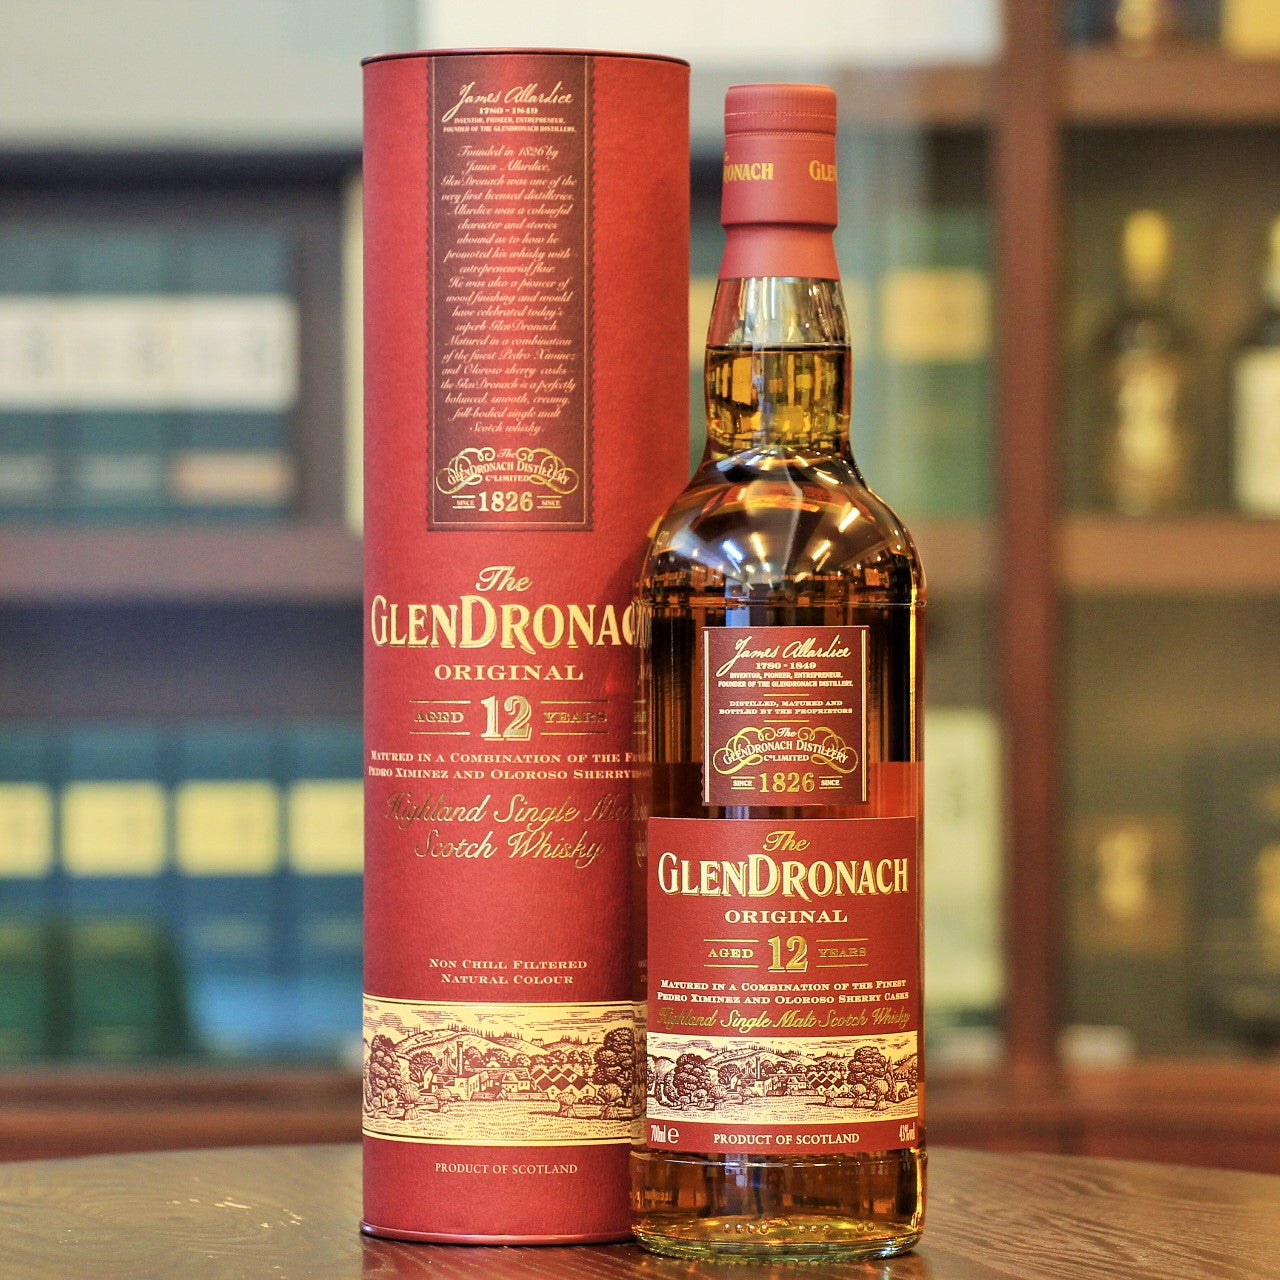 Glendronach Original 12 years old whisky. Buy now from Mizunara The Shop the retail liquor store of Hong Kong